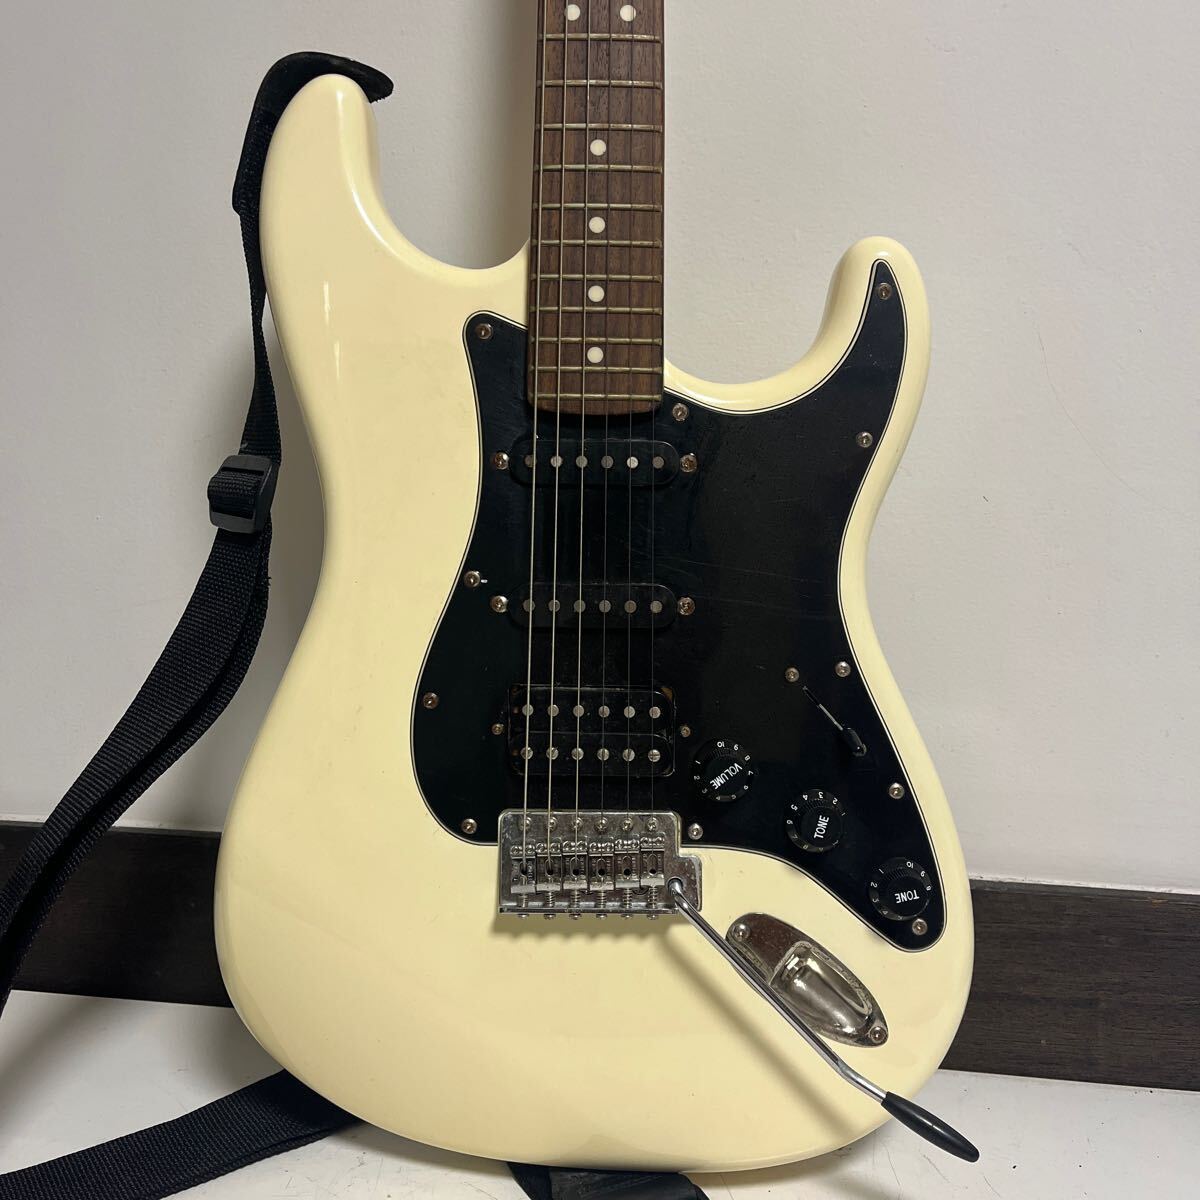 FENDER STRATOCASTER エレキギター crafted in China 